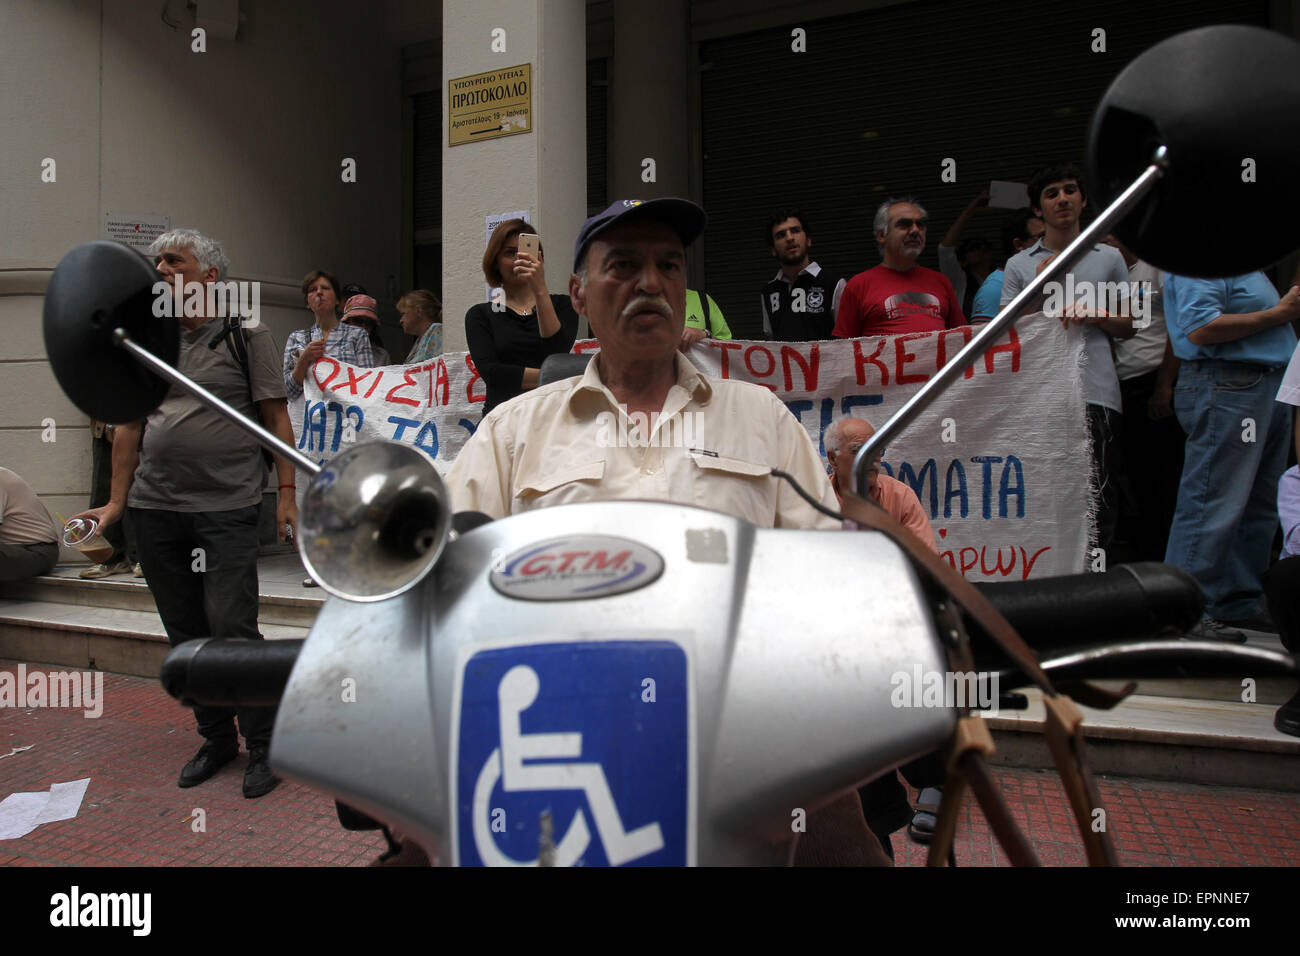 Athens, Greece. 20th May, 2015. Doctors, nurses and ambulance staff from Greece's public hospitals and health centers protest outside the Health Ministry in Athens, Greece, on May 20, 2015. Hospital staff started a 24-hour strike to demand back pay and to denounce understaffing and underfunding of national health service. Credit:  Marios Lolos/Xinhua/Alamy Live News Stock Photo